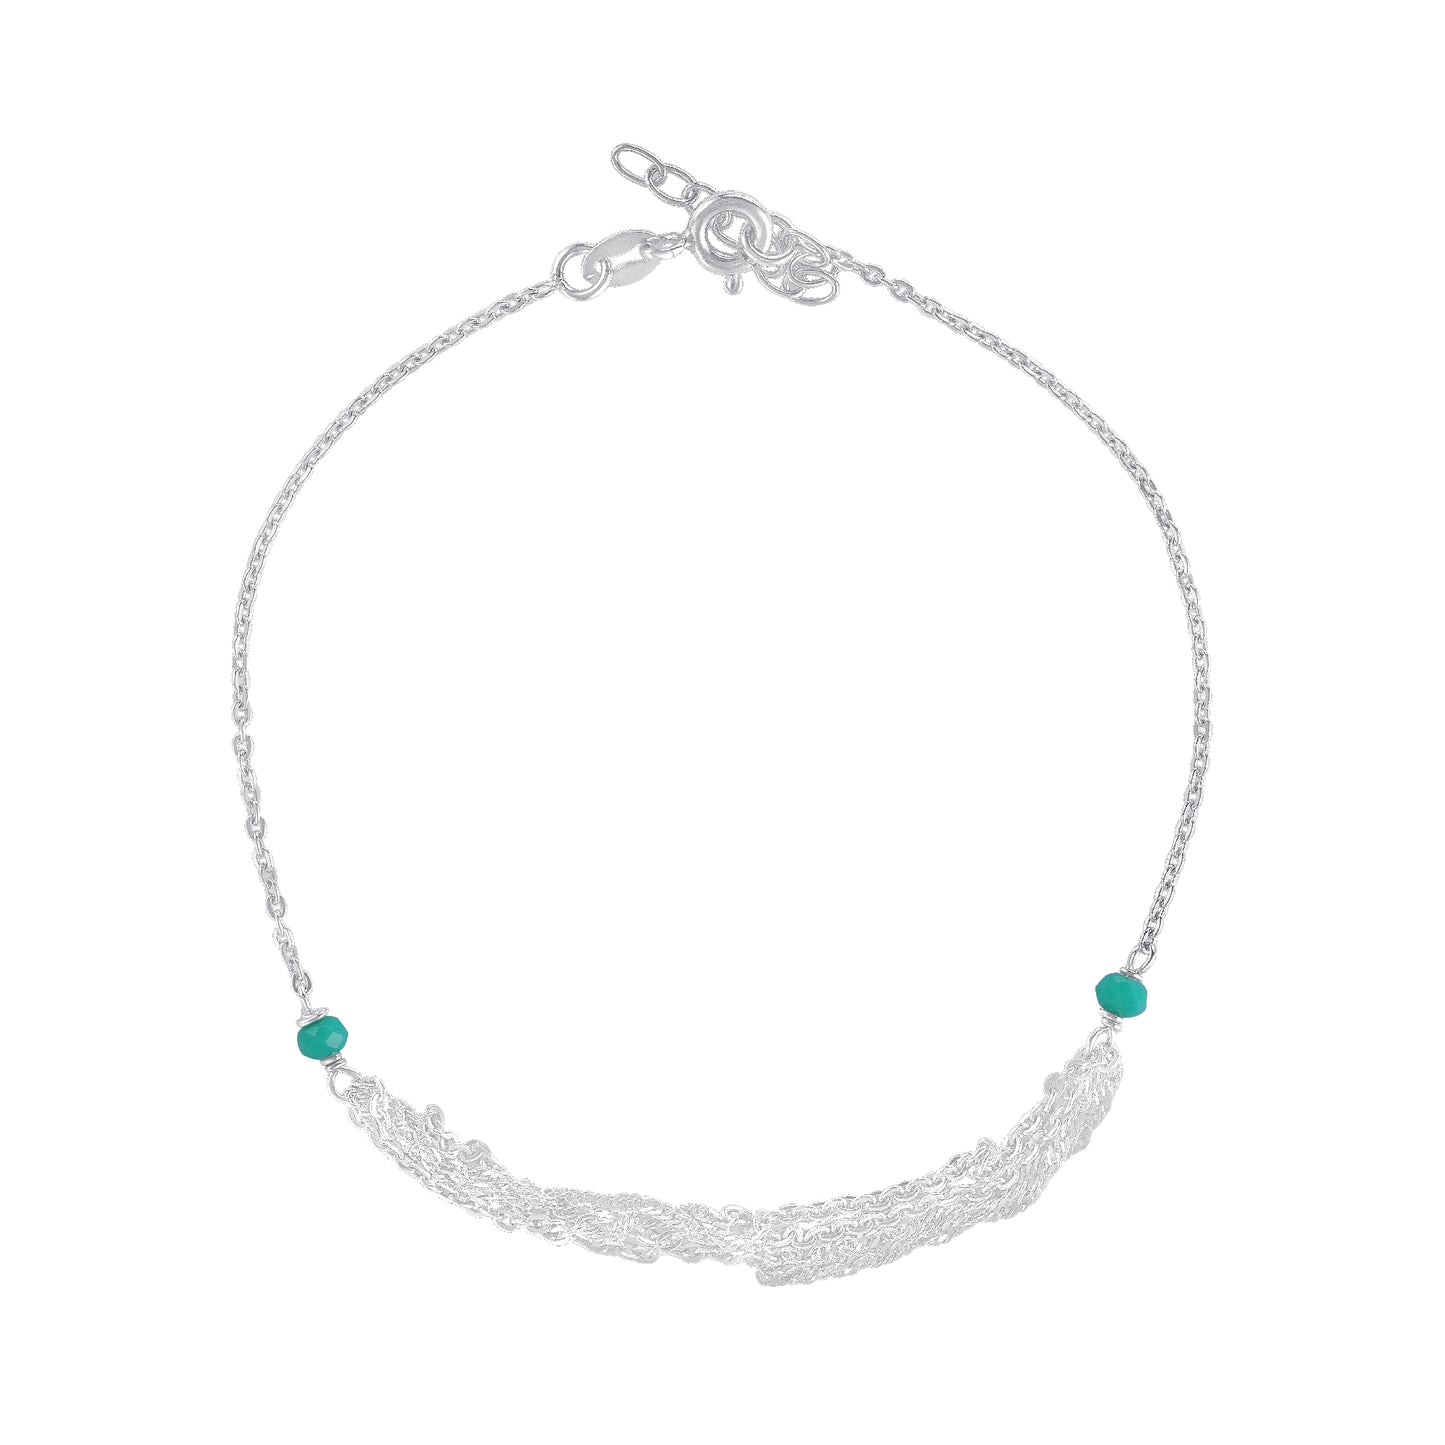 ANK06. Silver 925 Rhodium Plated Turquoise Cubic Zirconia Anklet